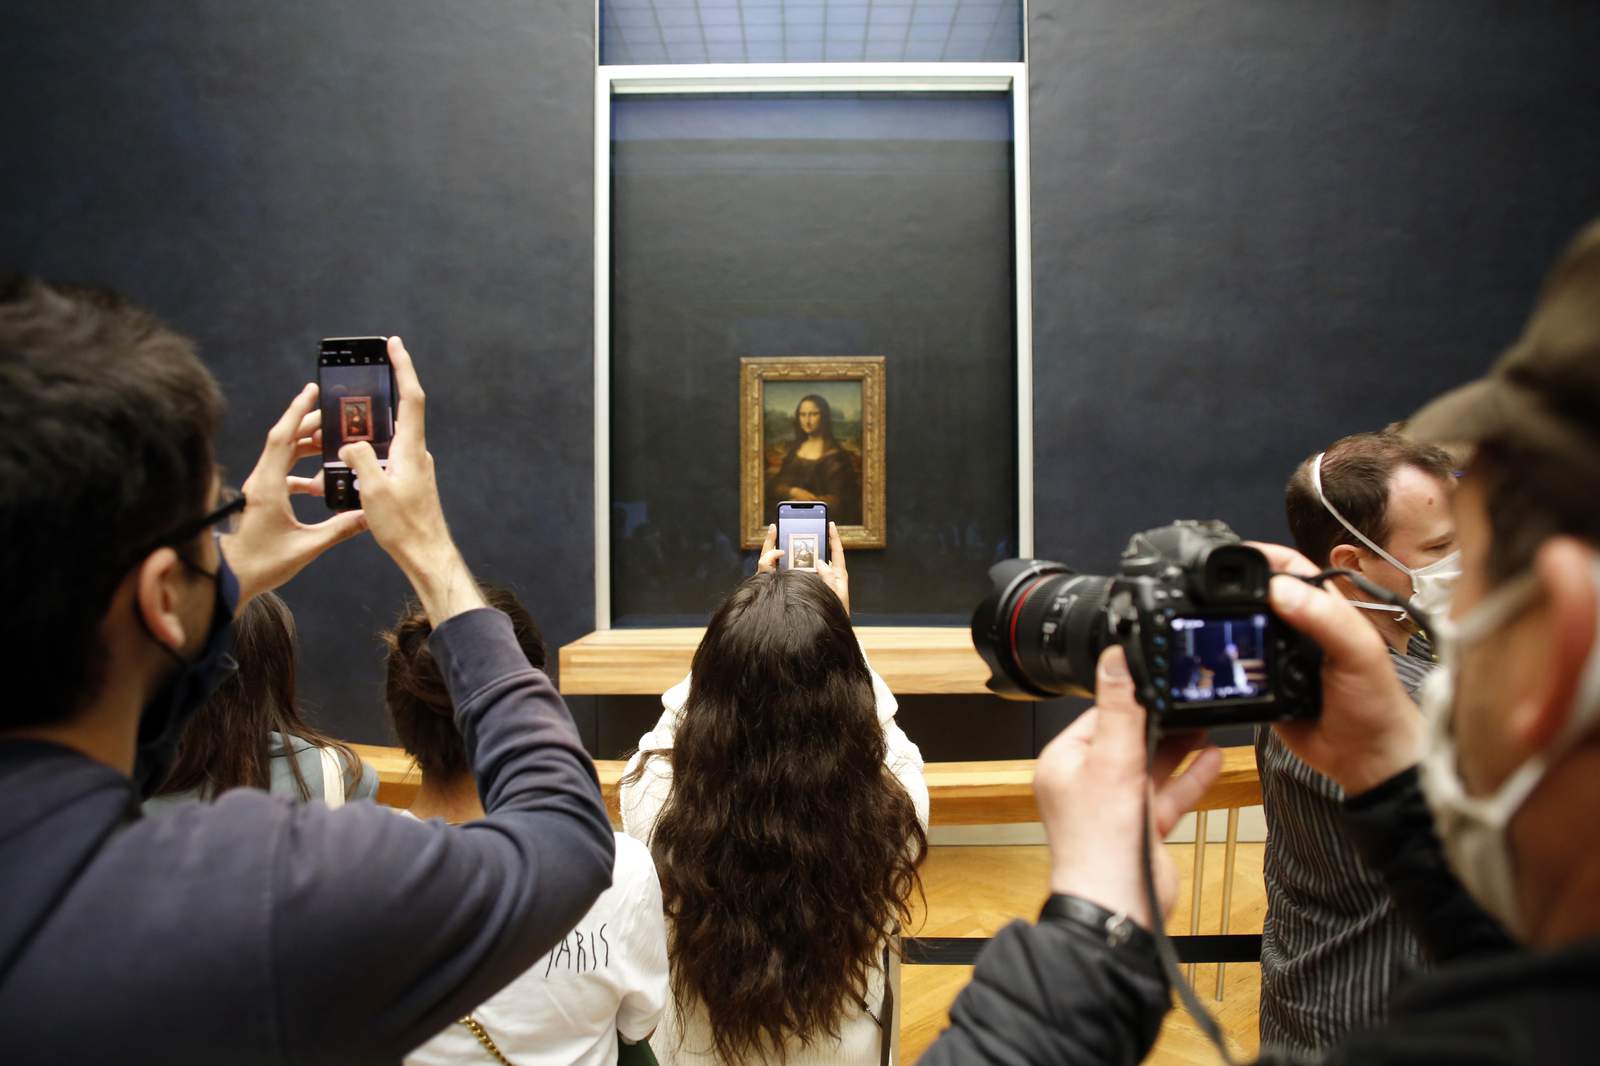 "Mona Lisa" back at work, visitors limited as Louvre reopens